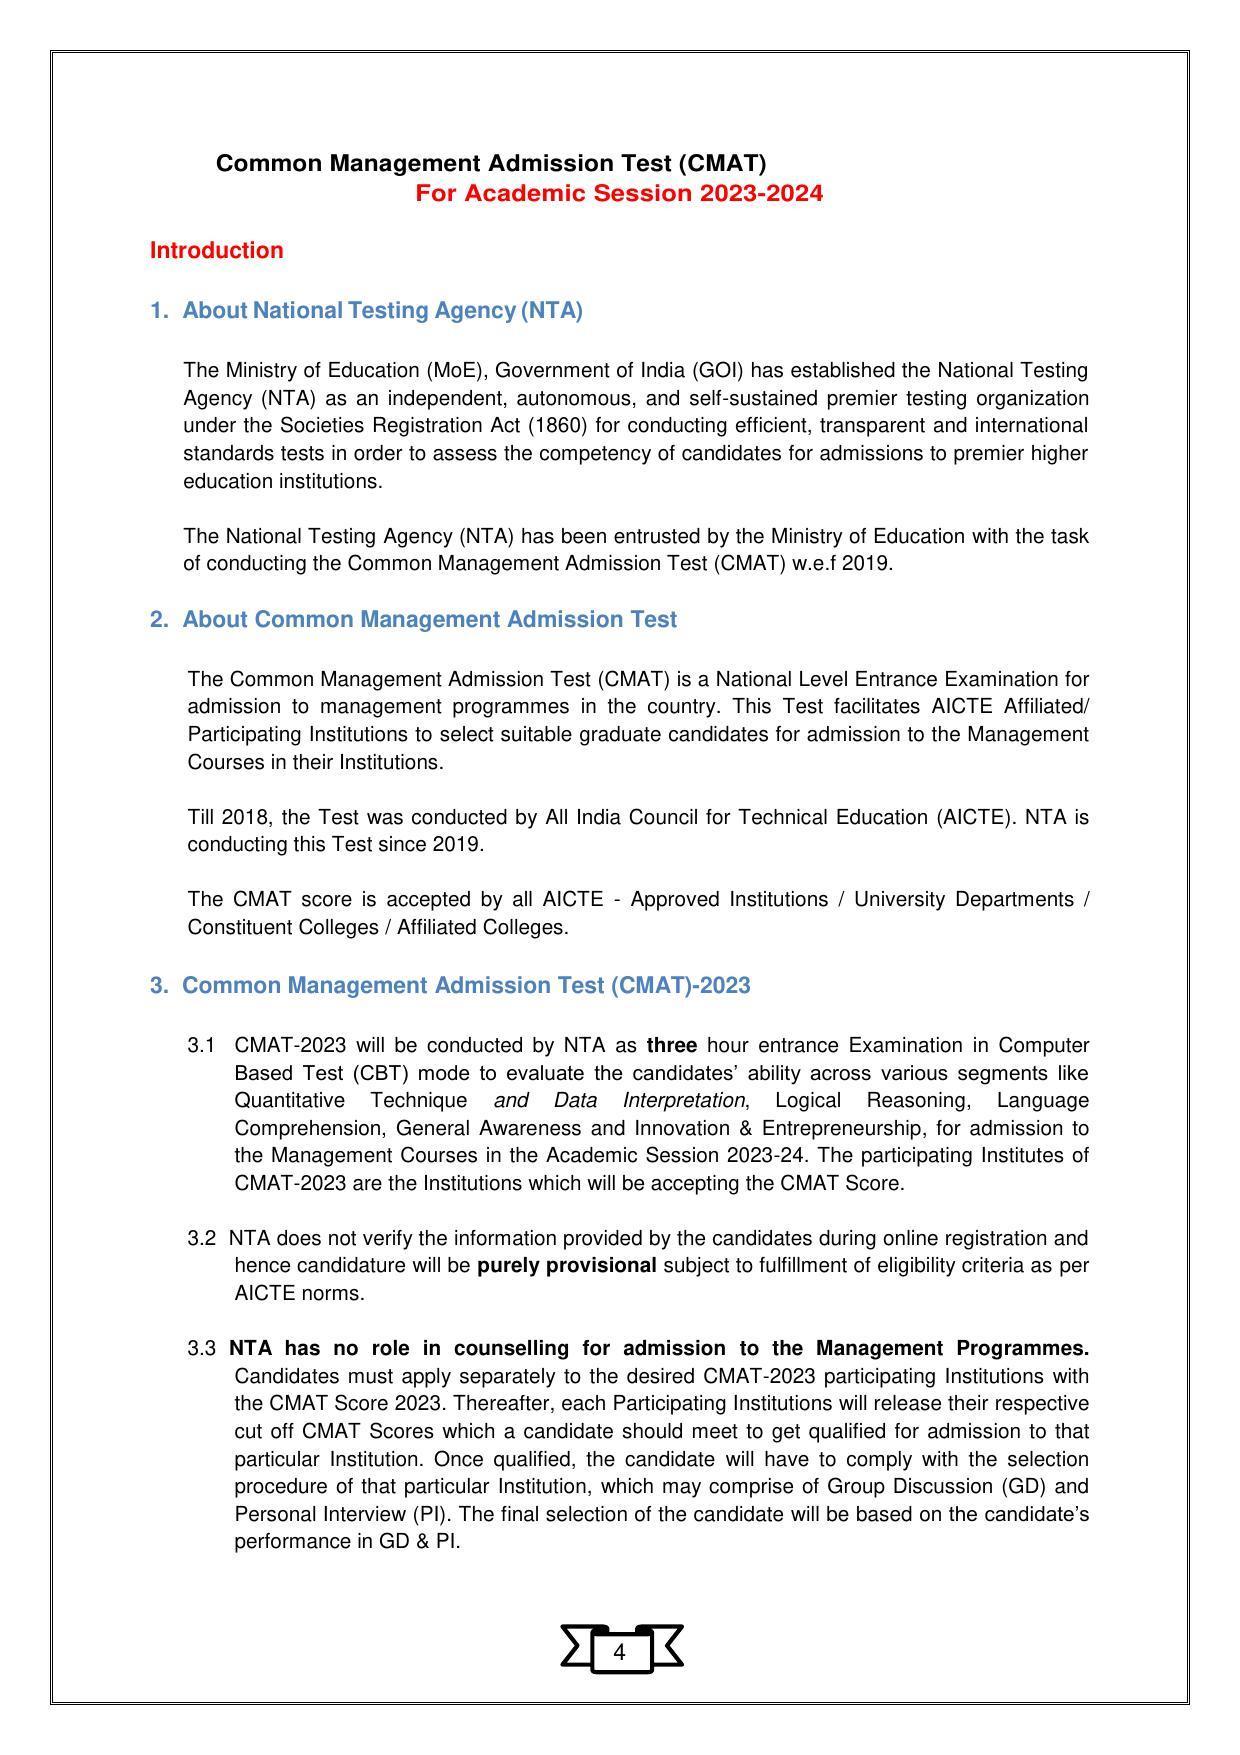 CMAT 2023 Information Bulletin - Page 7